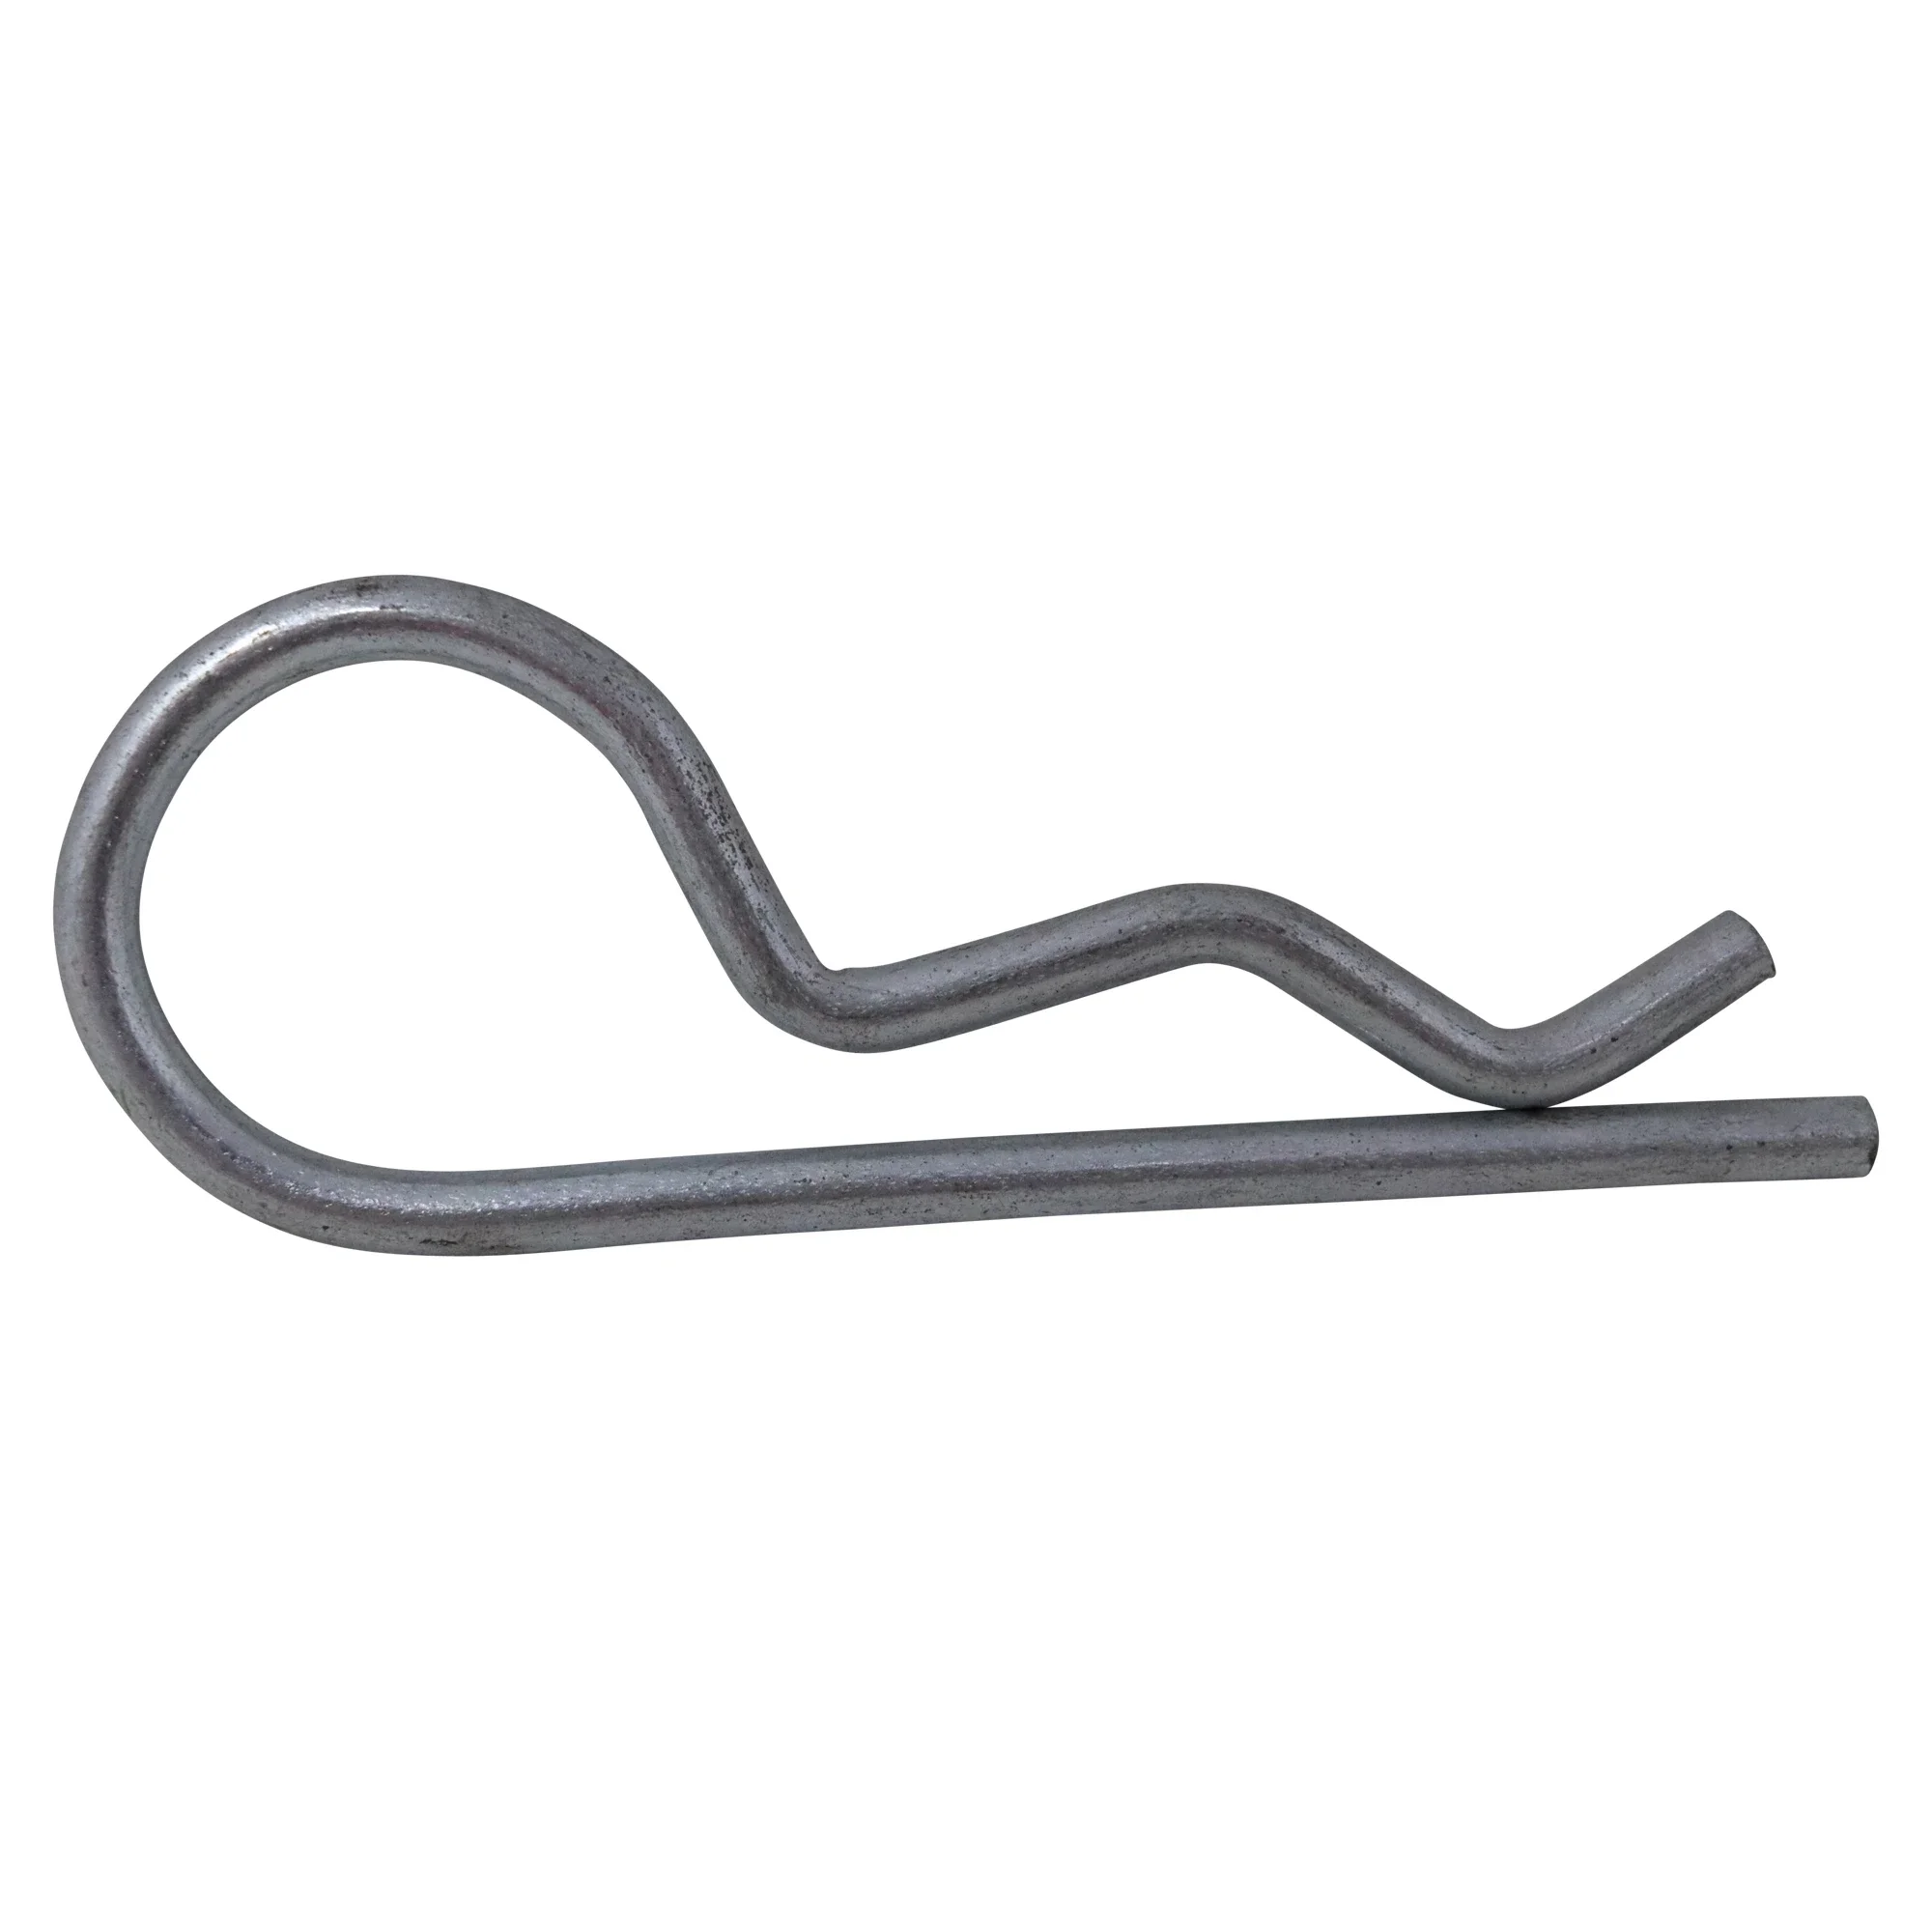 Wastebuilt® Replacement for Curotto-Can Cotter Hairpin